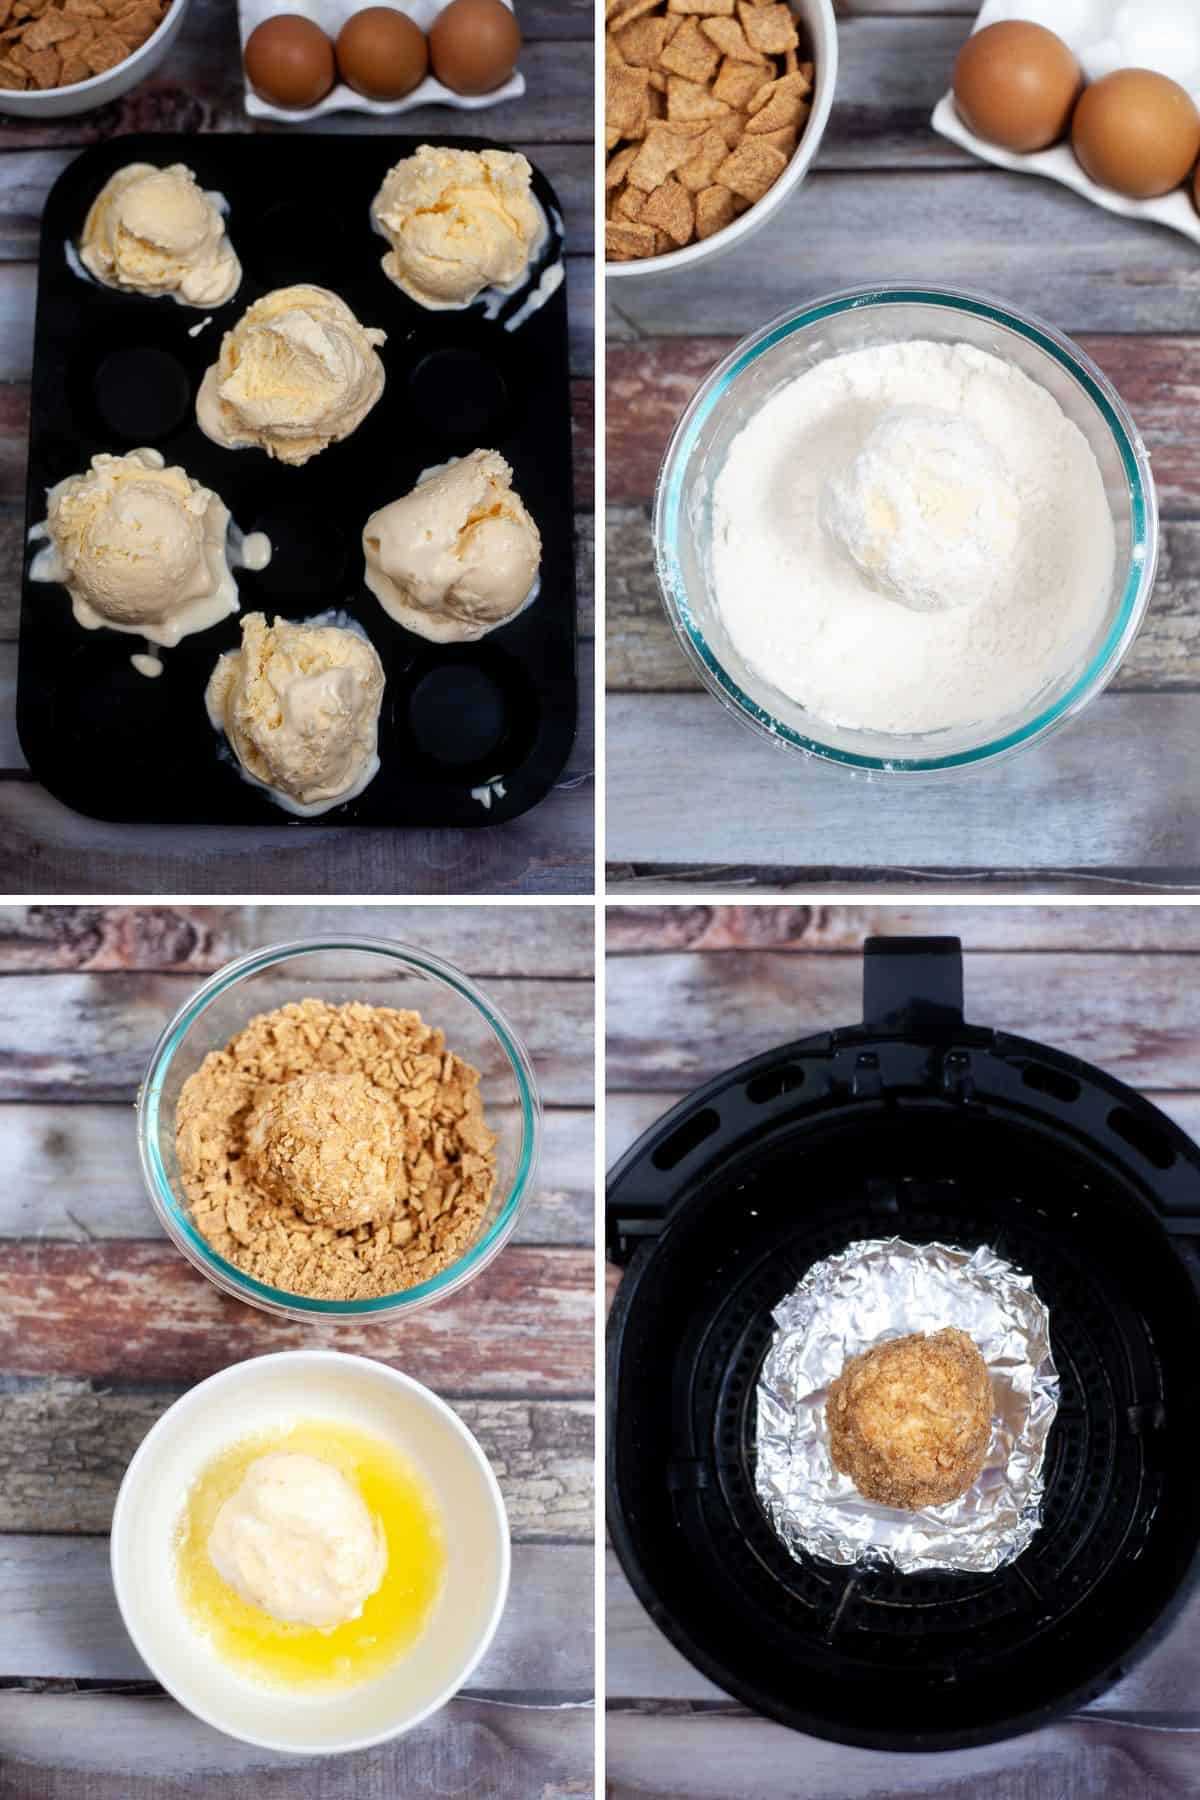 Steps to make air fryer fried ice cream.